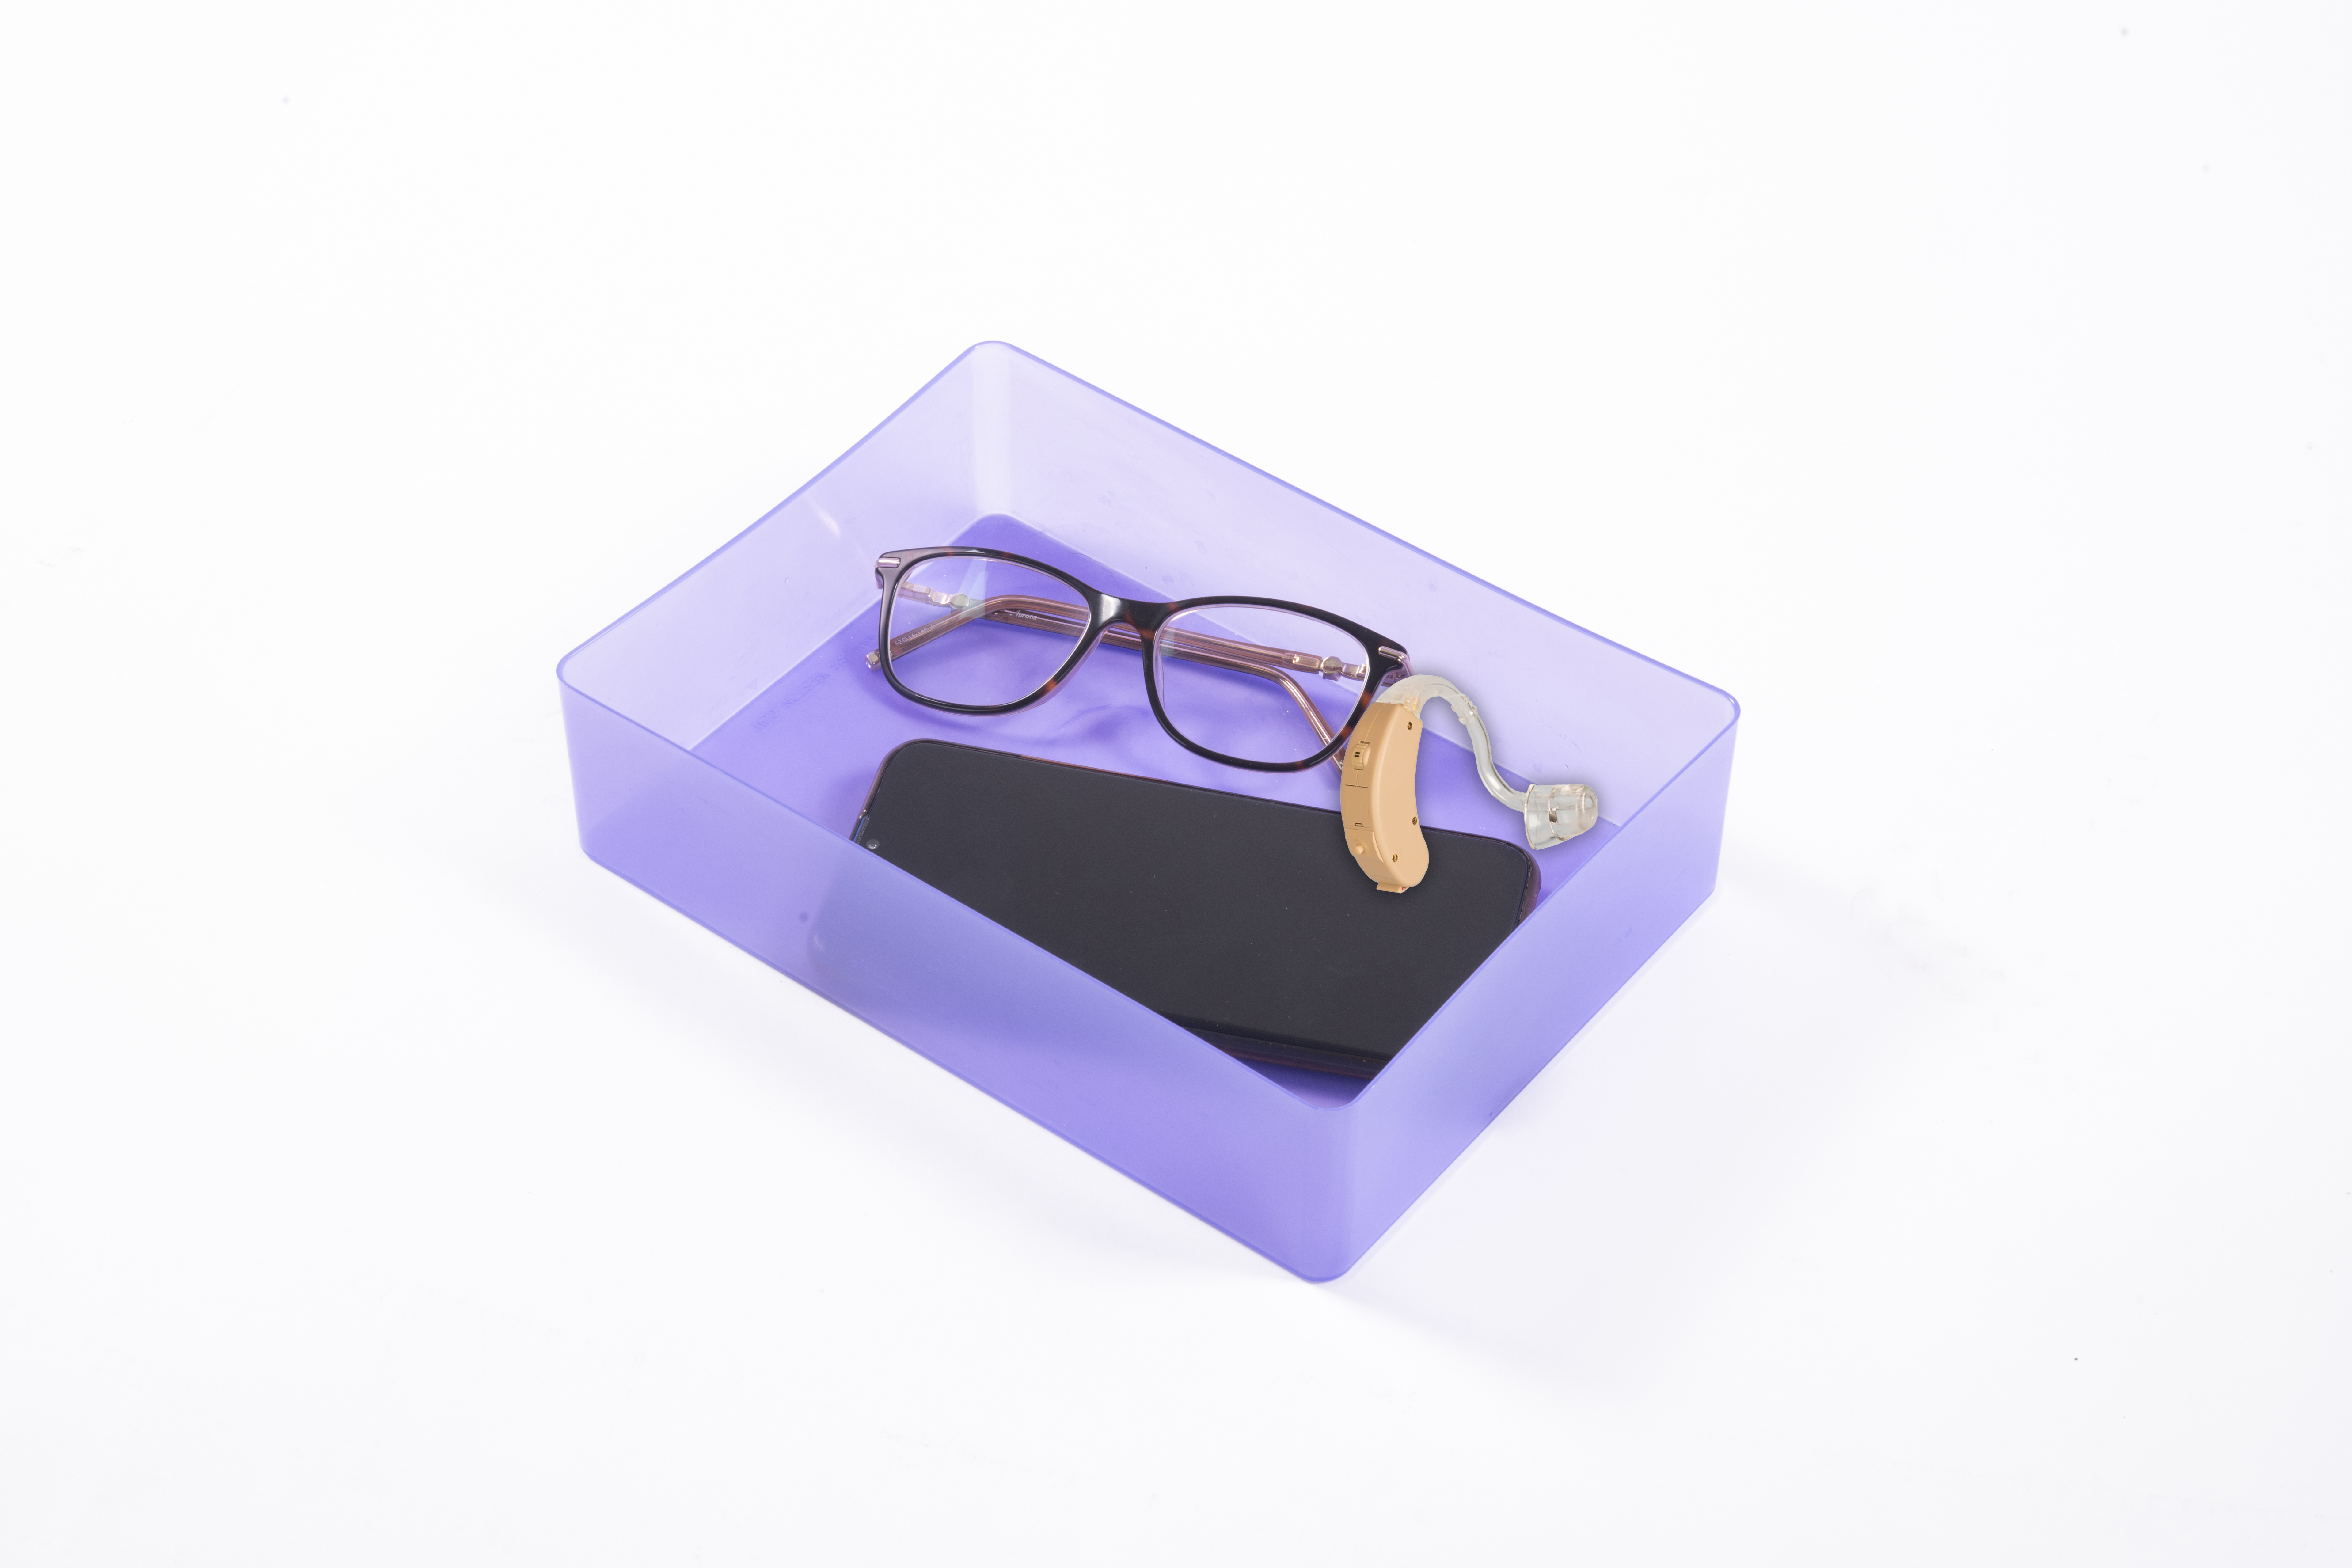 Sensory box holding glasses, hearing aid, and mobile phone